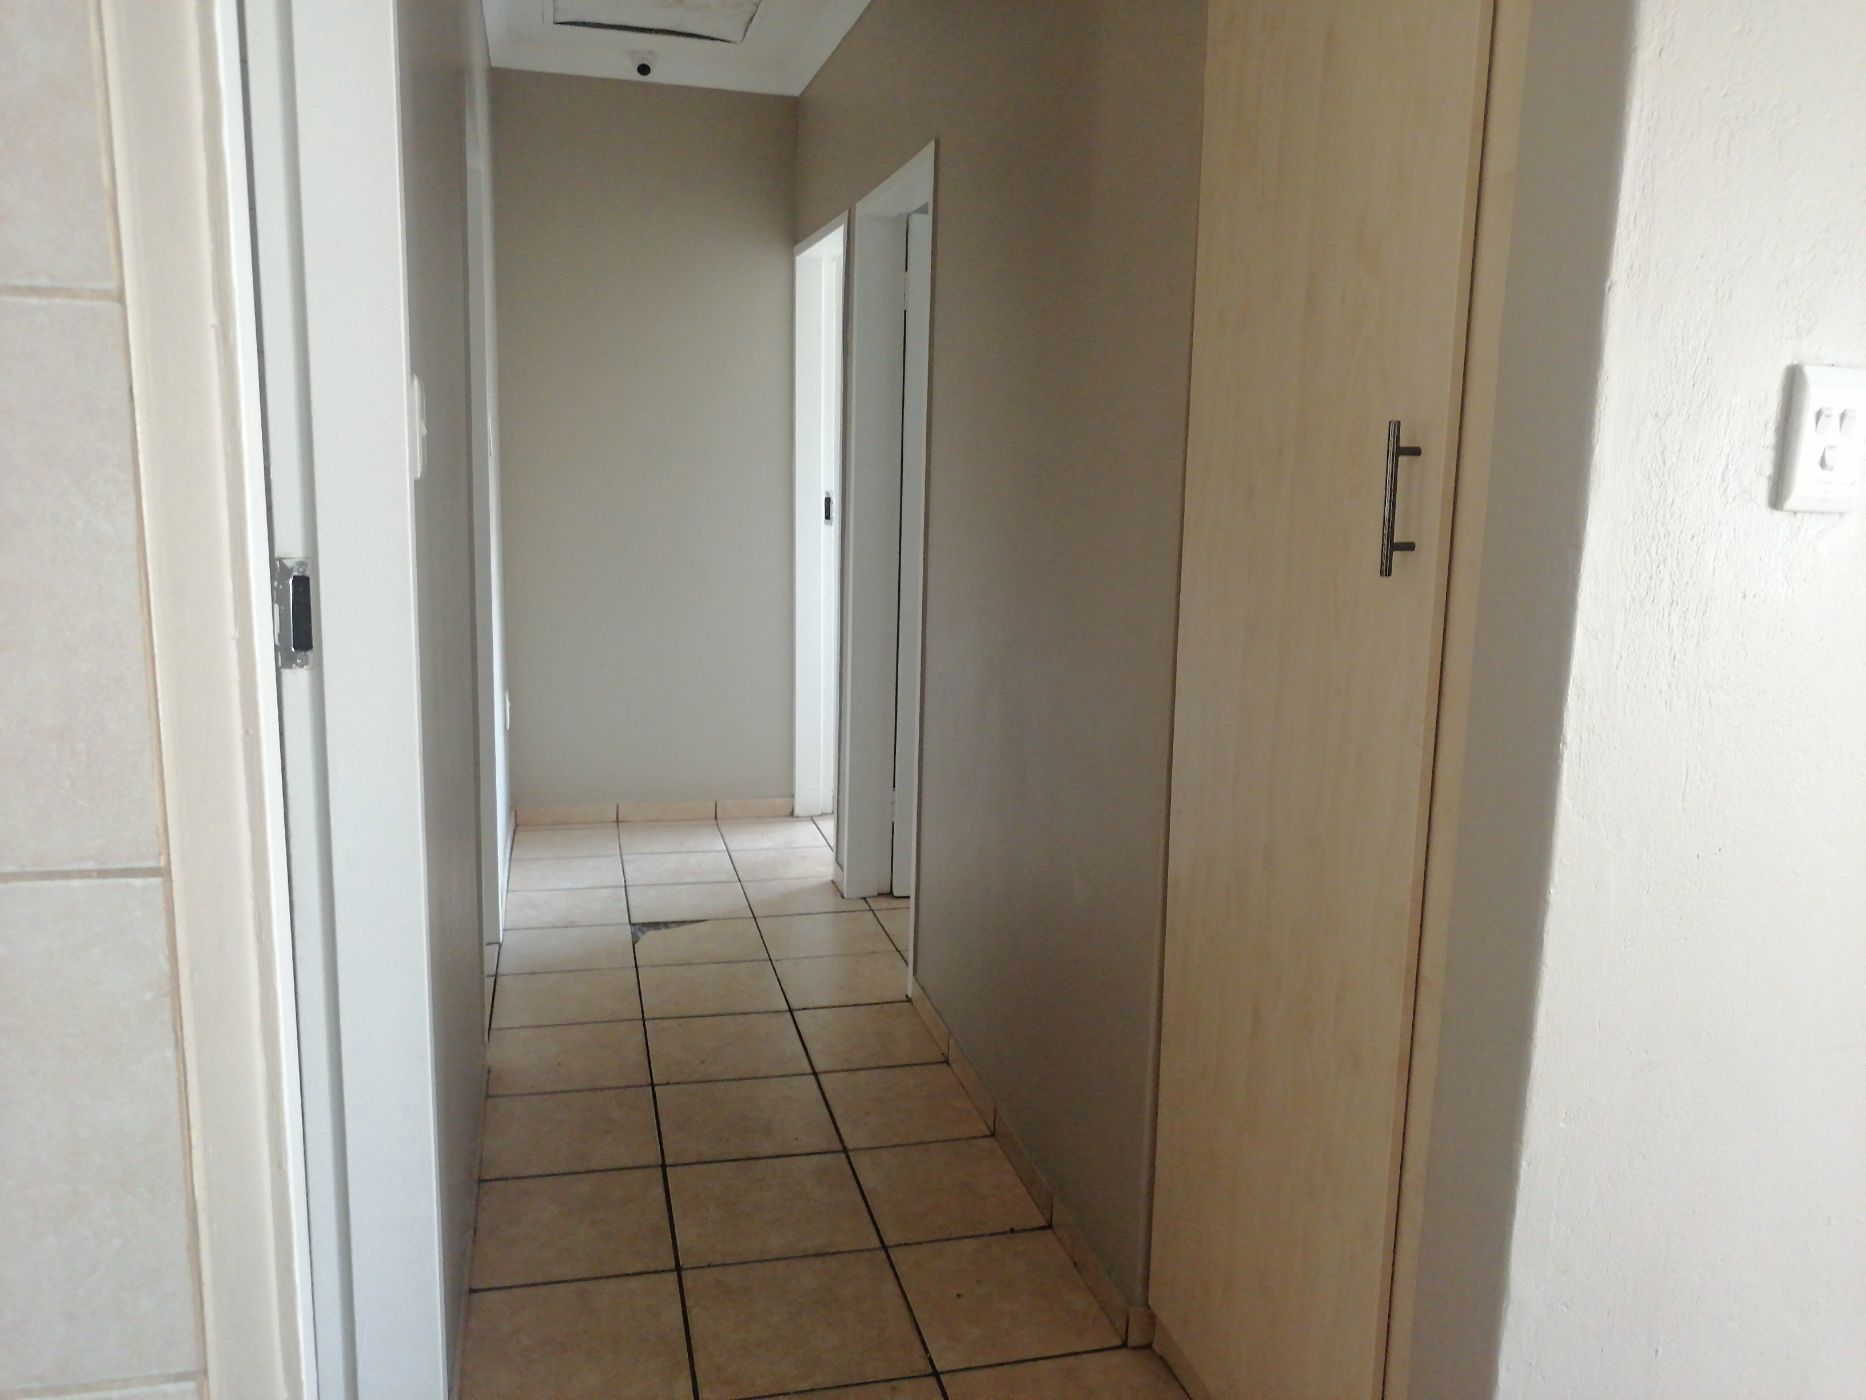 3 bedroom house to rent in Middelburg Central (Mpumalanga Central)